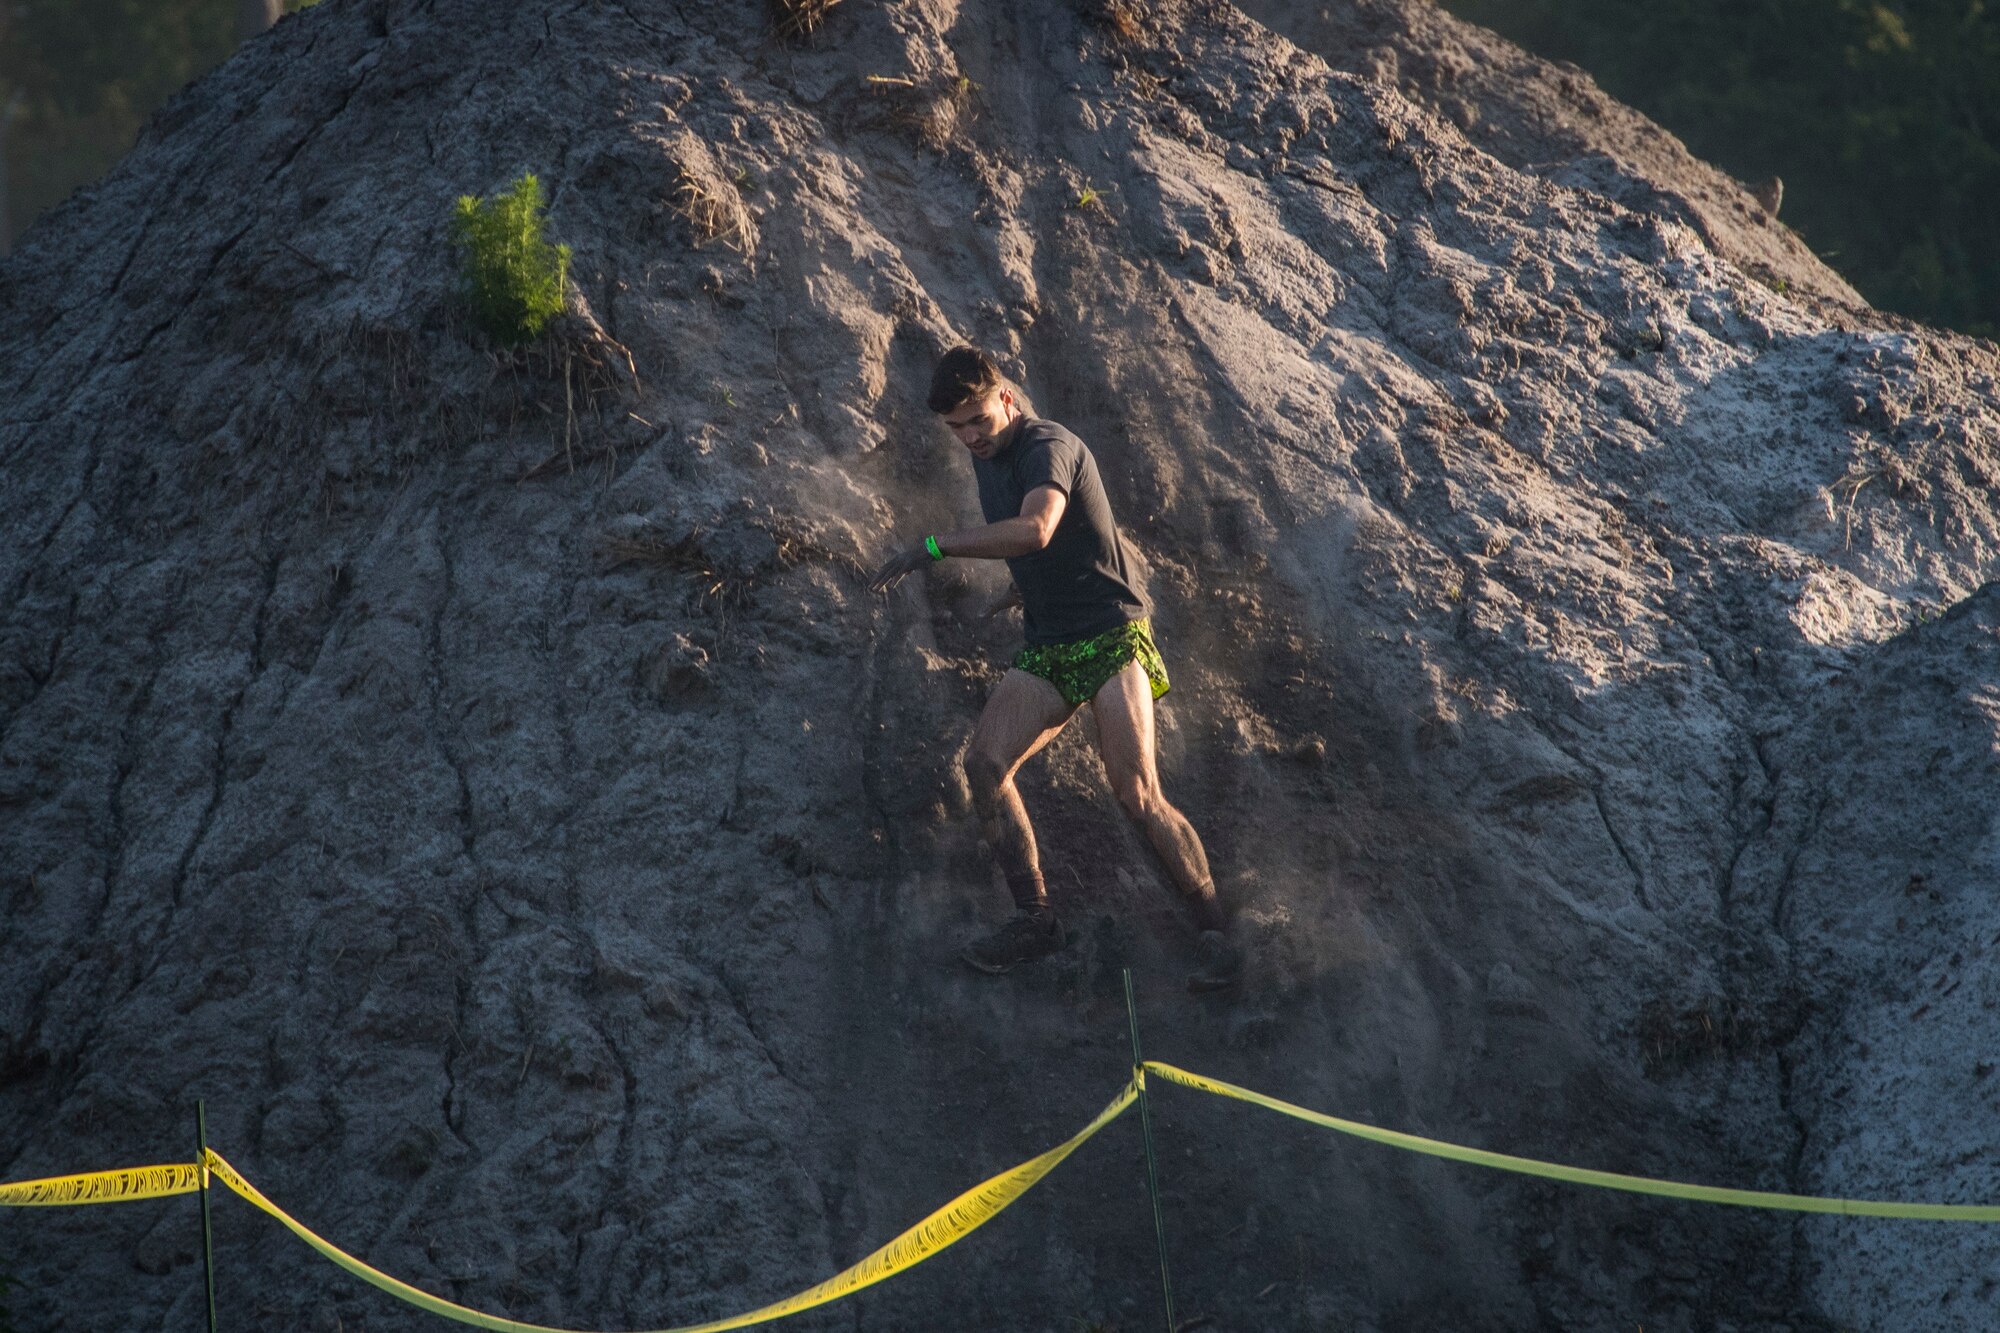 A Moody Mud Run participant slides down a hill, May 5, 2018, in Ray City, Ga. Participants trekked 4.6 miles through the mud, water and 29 obstacles that made up the course. This is the fifth year Moody has hosted the event and more than 800 patrons participated. (U.S. Air Force photo by Senior Airman Janiqua P. Robinson)